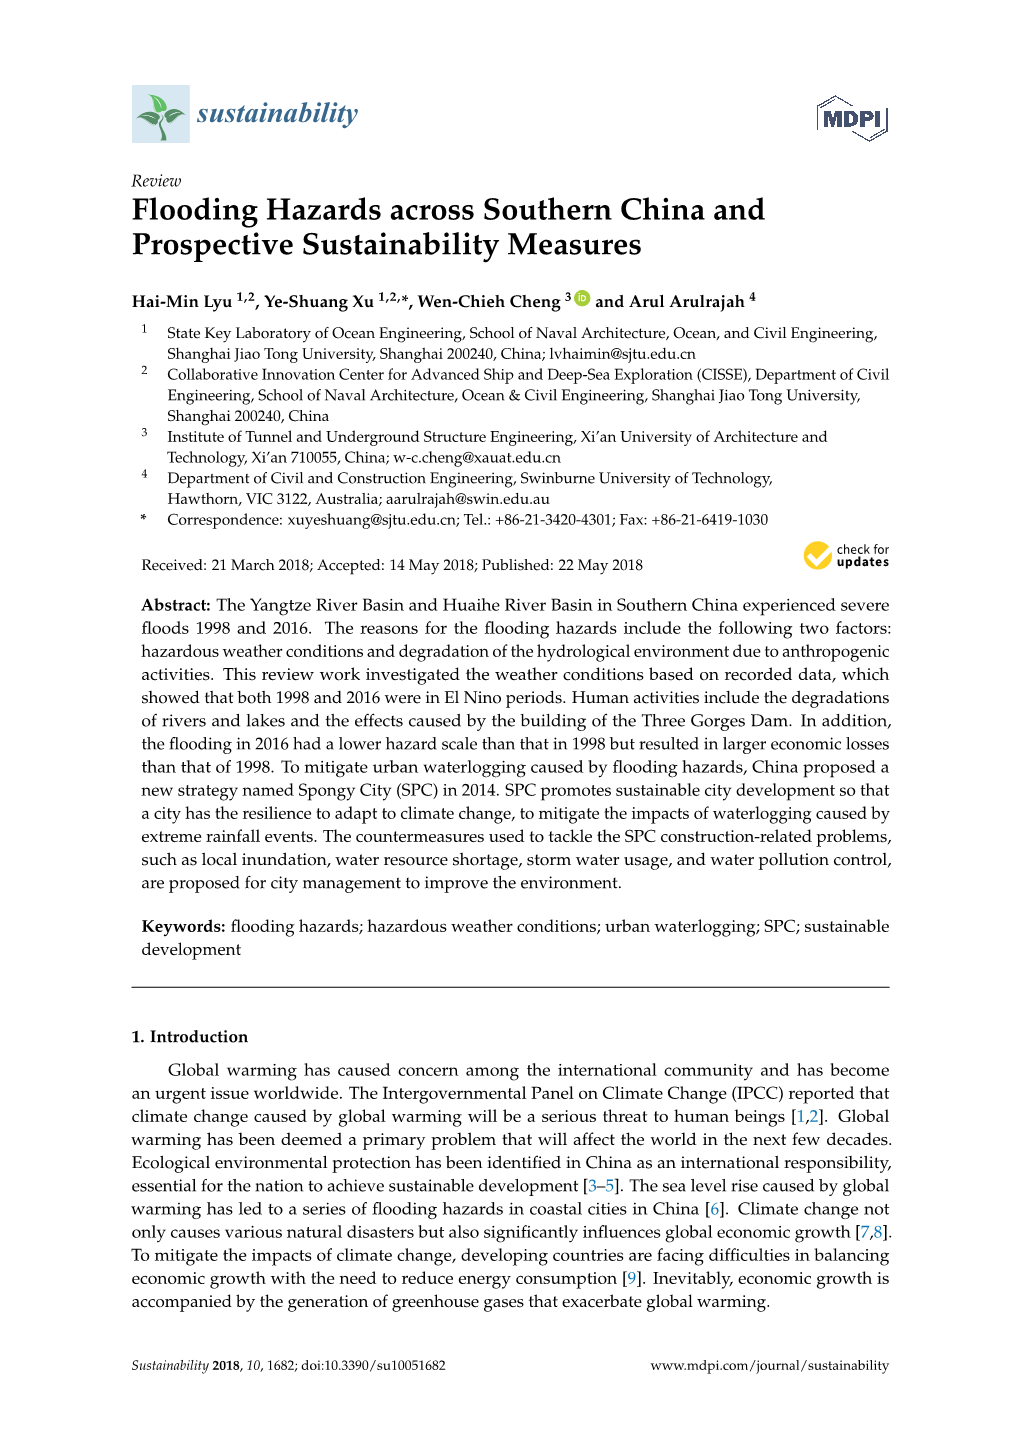 Flooding Hazards Across Southern China and Prospective Sustainability Measures